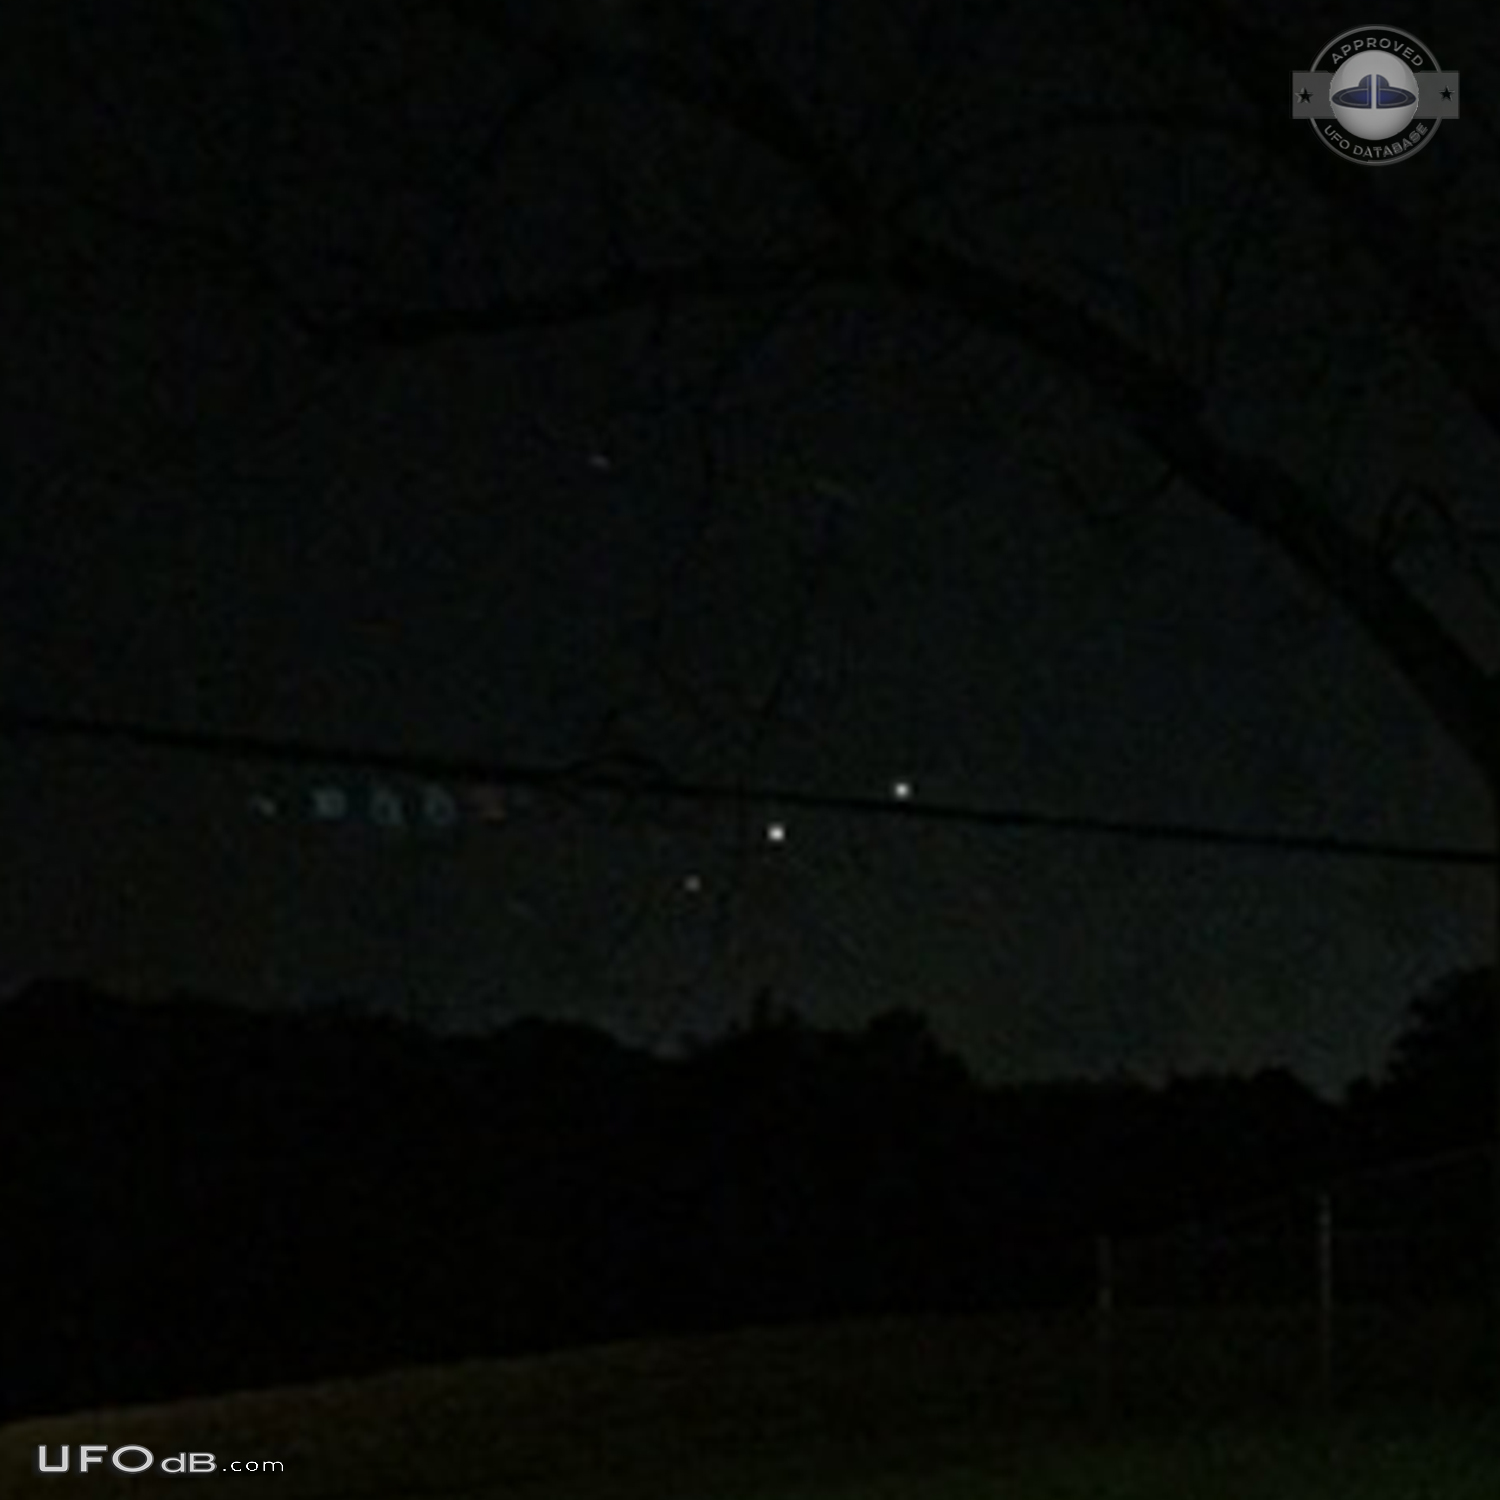 Perfect line of hovering UFOs low to ground - Hazelwood Missouri 2015 UFO Picture #737-3